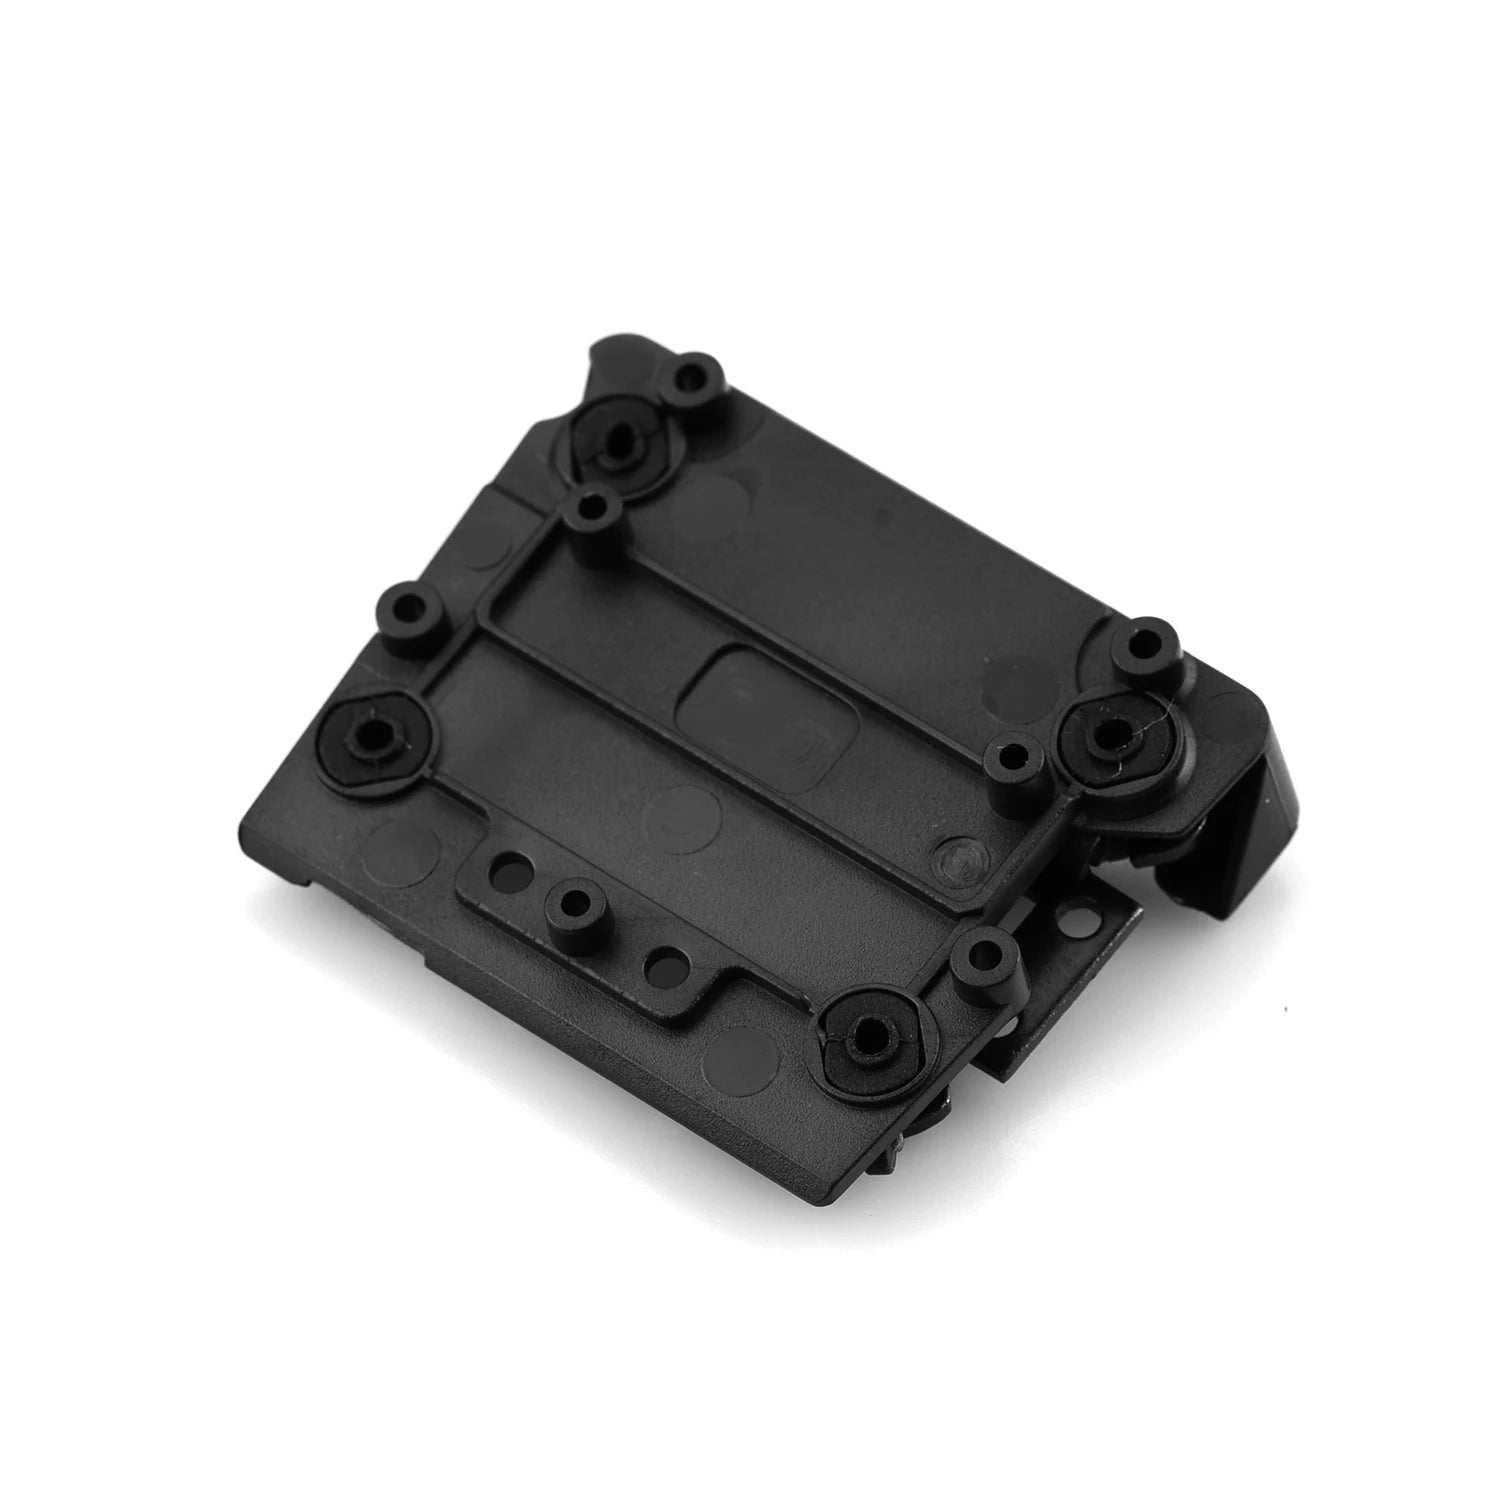 gimbal mount for DJI mavic pro comes with screws for easy installation .